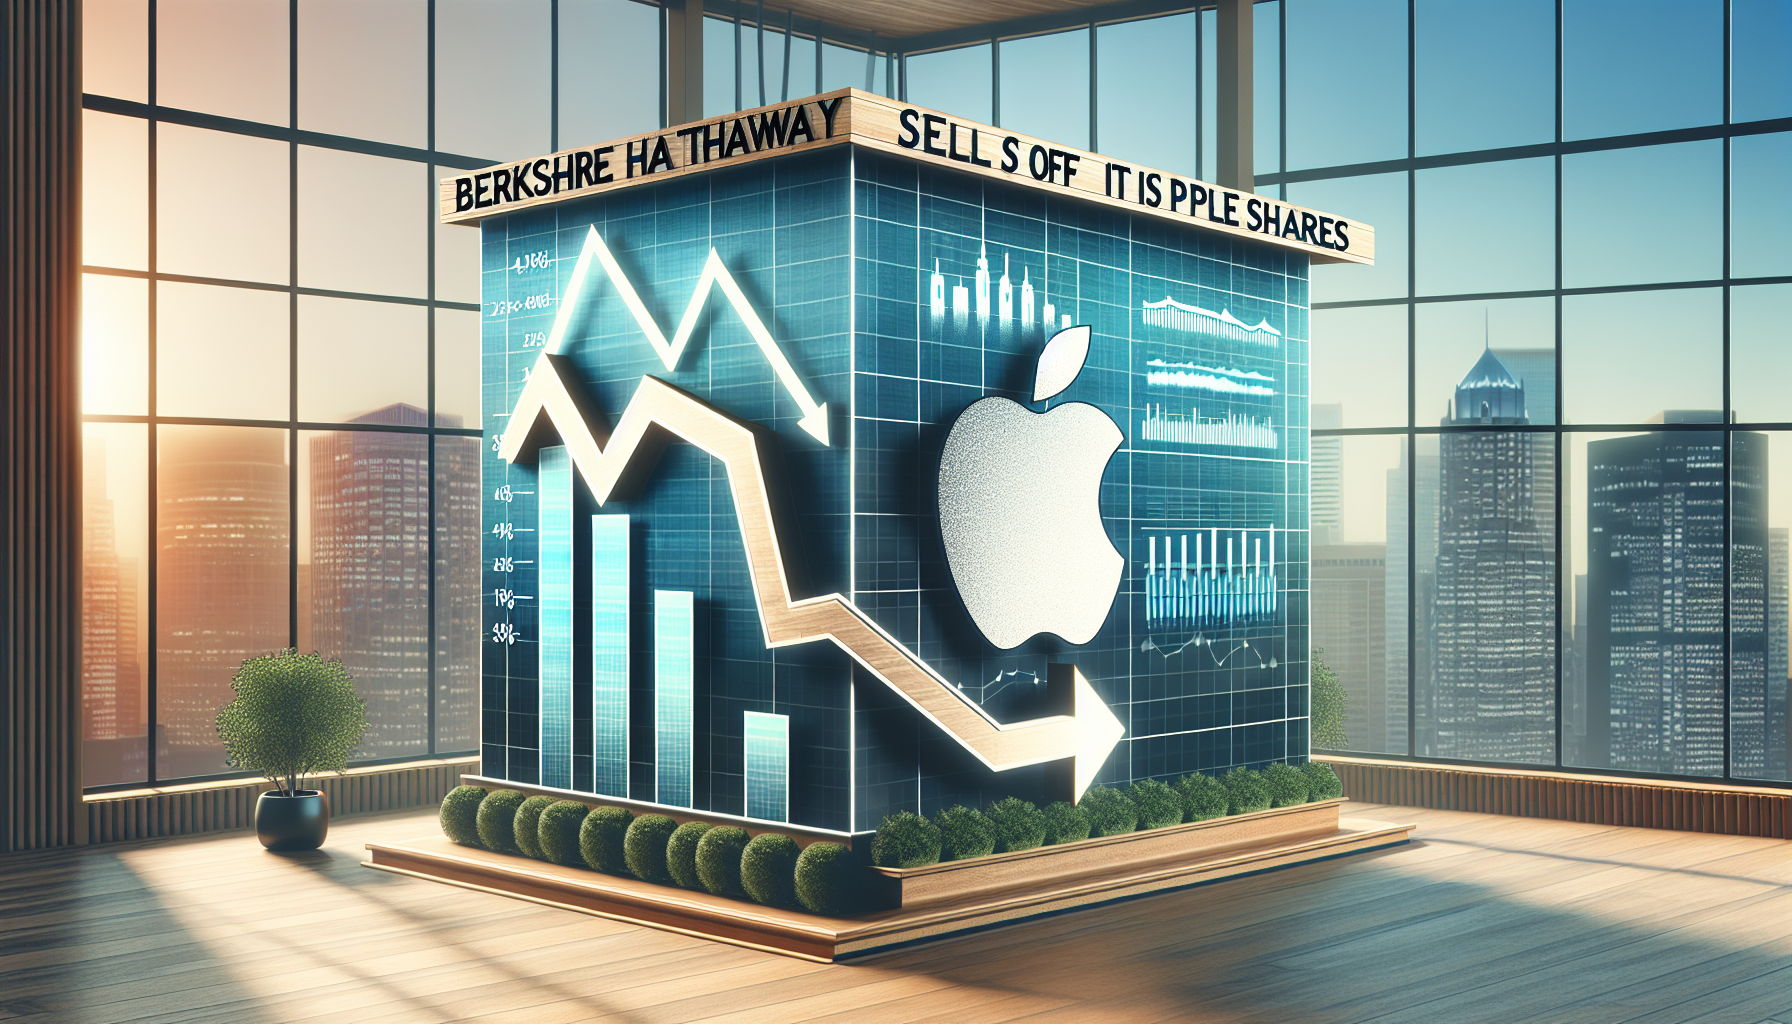 Berkshire Hathaway Sells Off 13% of Its Apple Shares – Find Out Why!